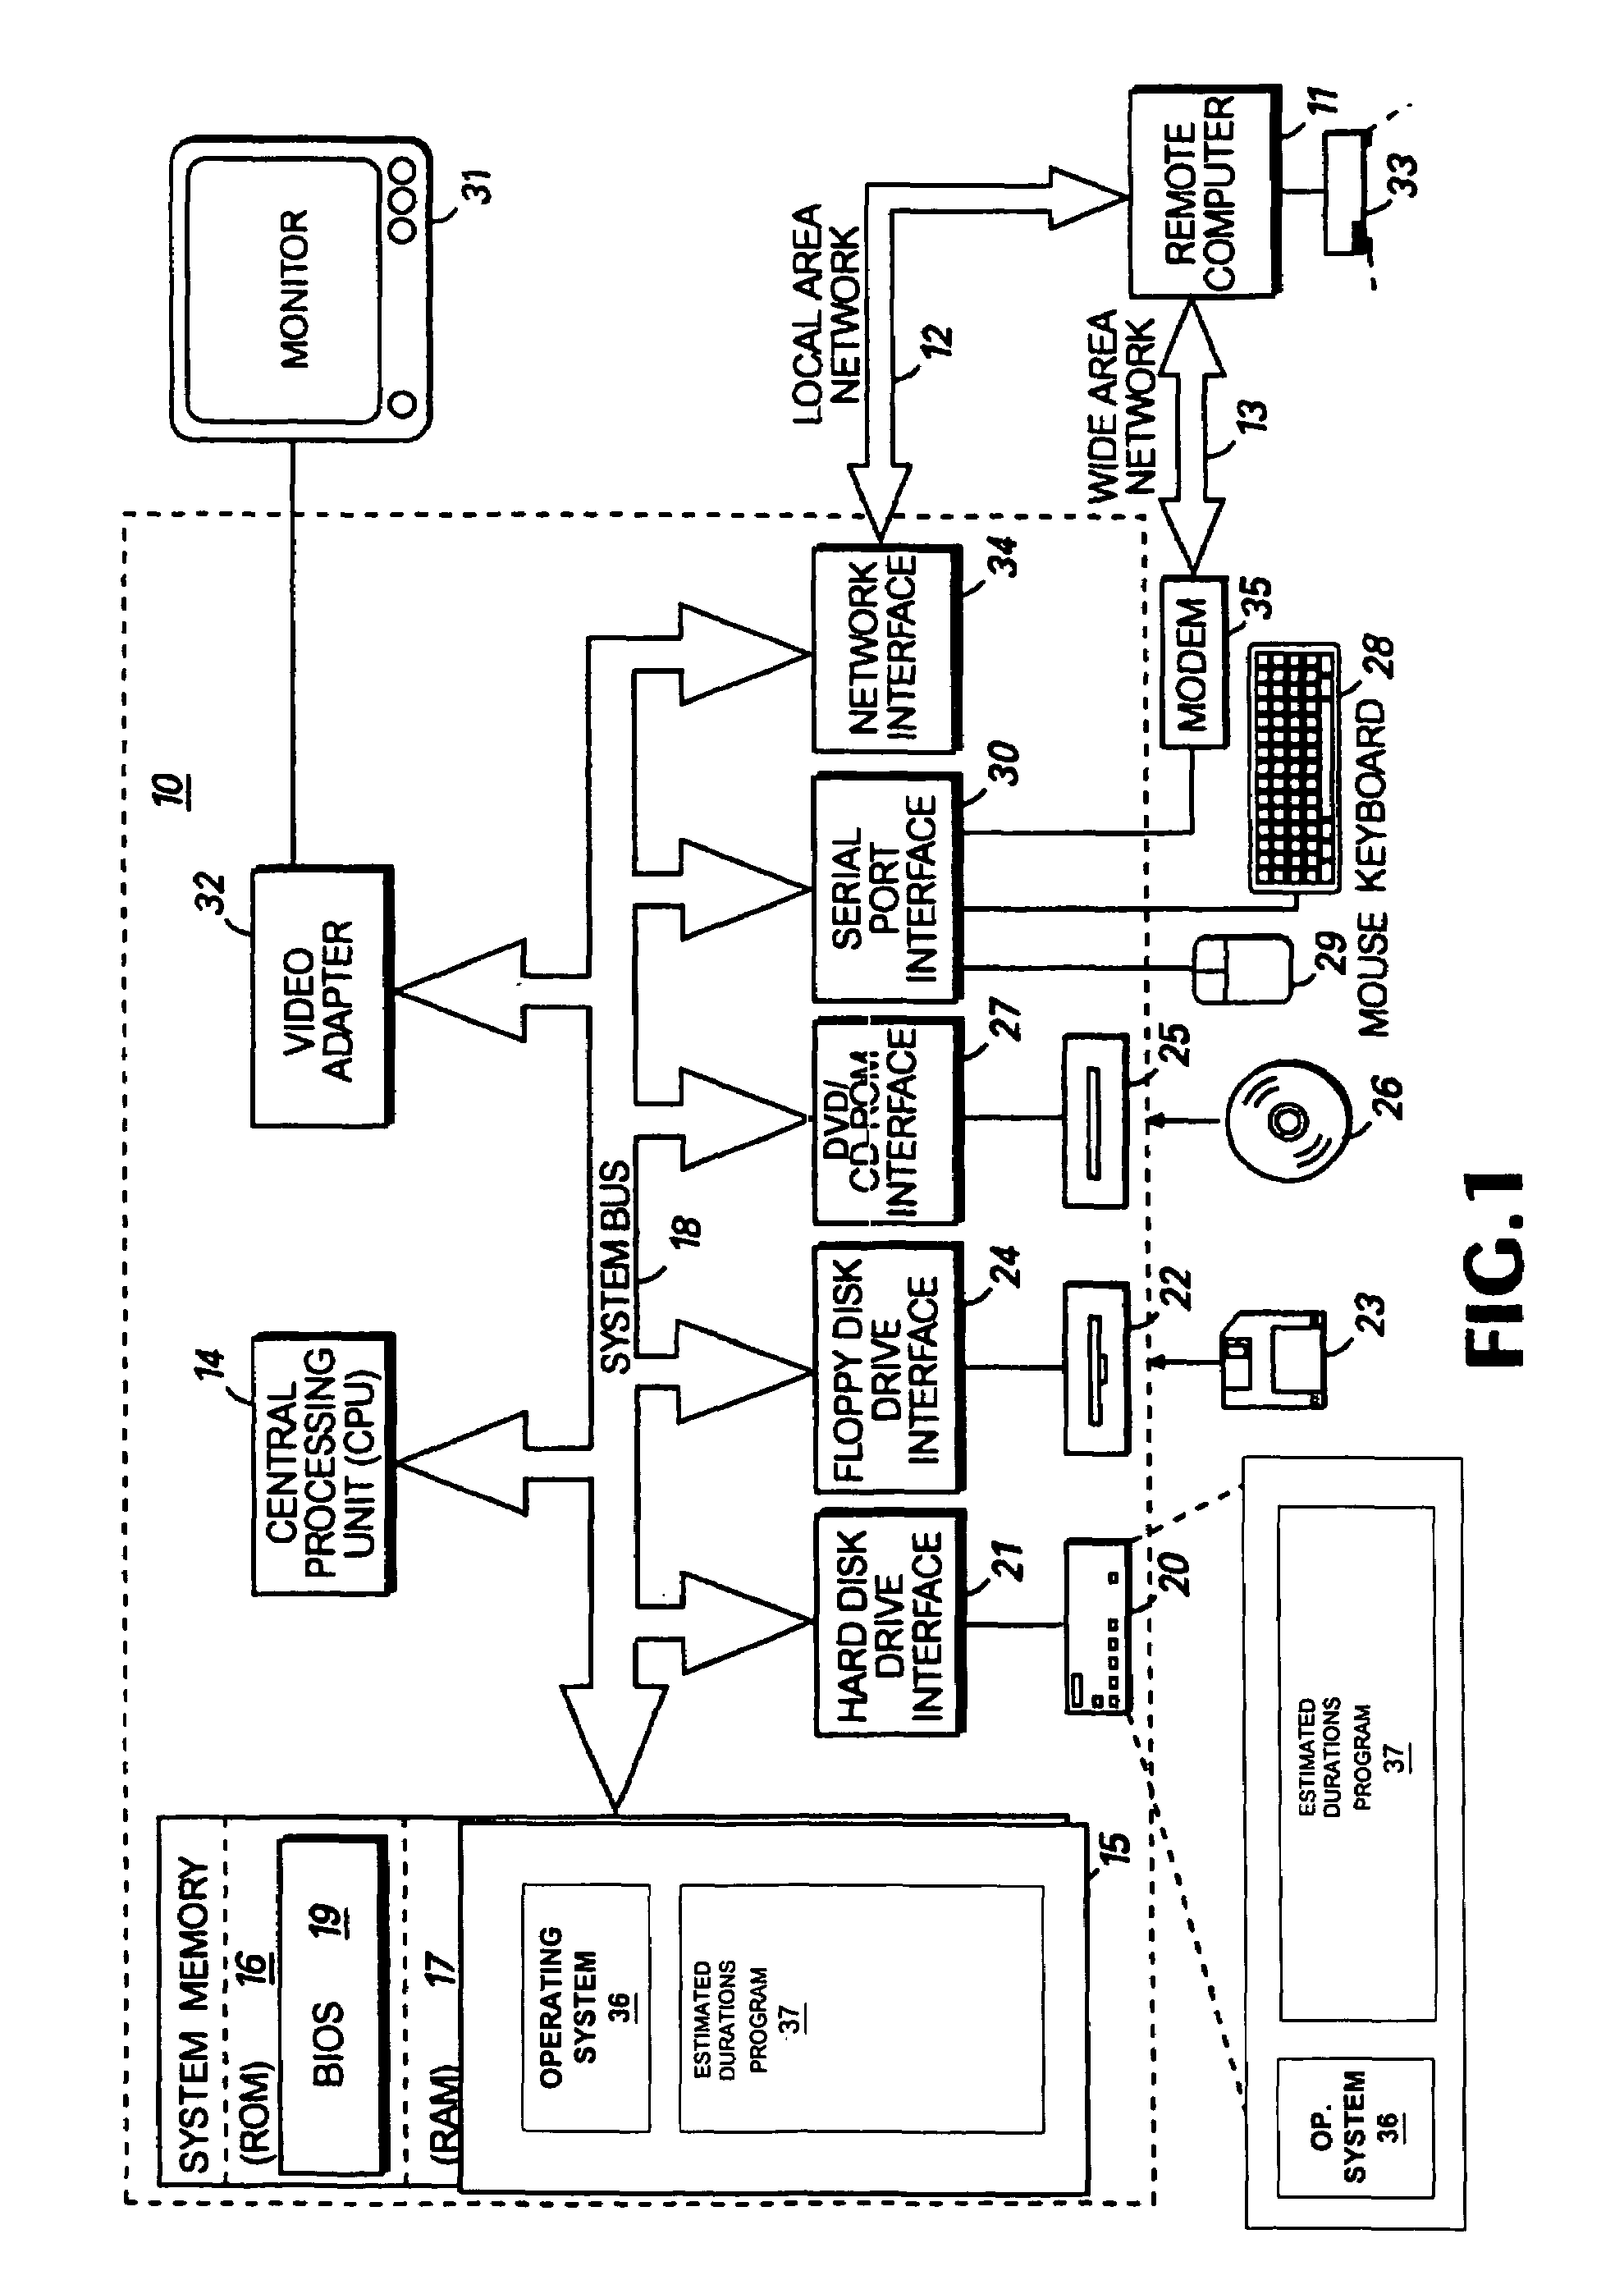 Method and system for visually indicating project task durations are estimated using a character